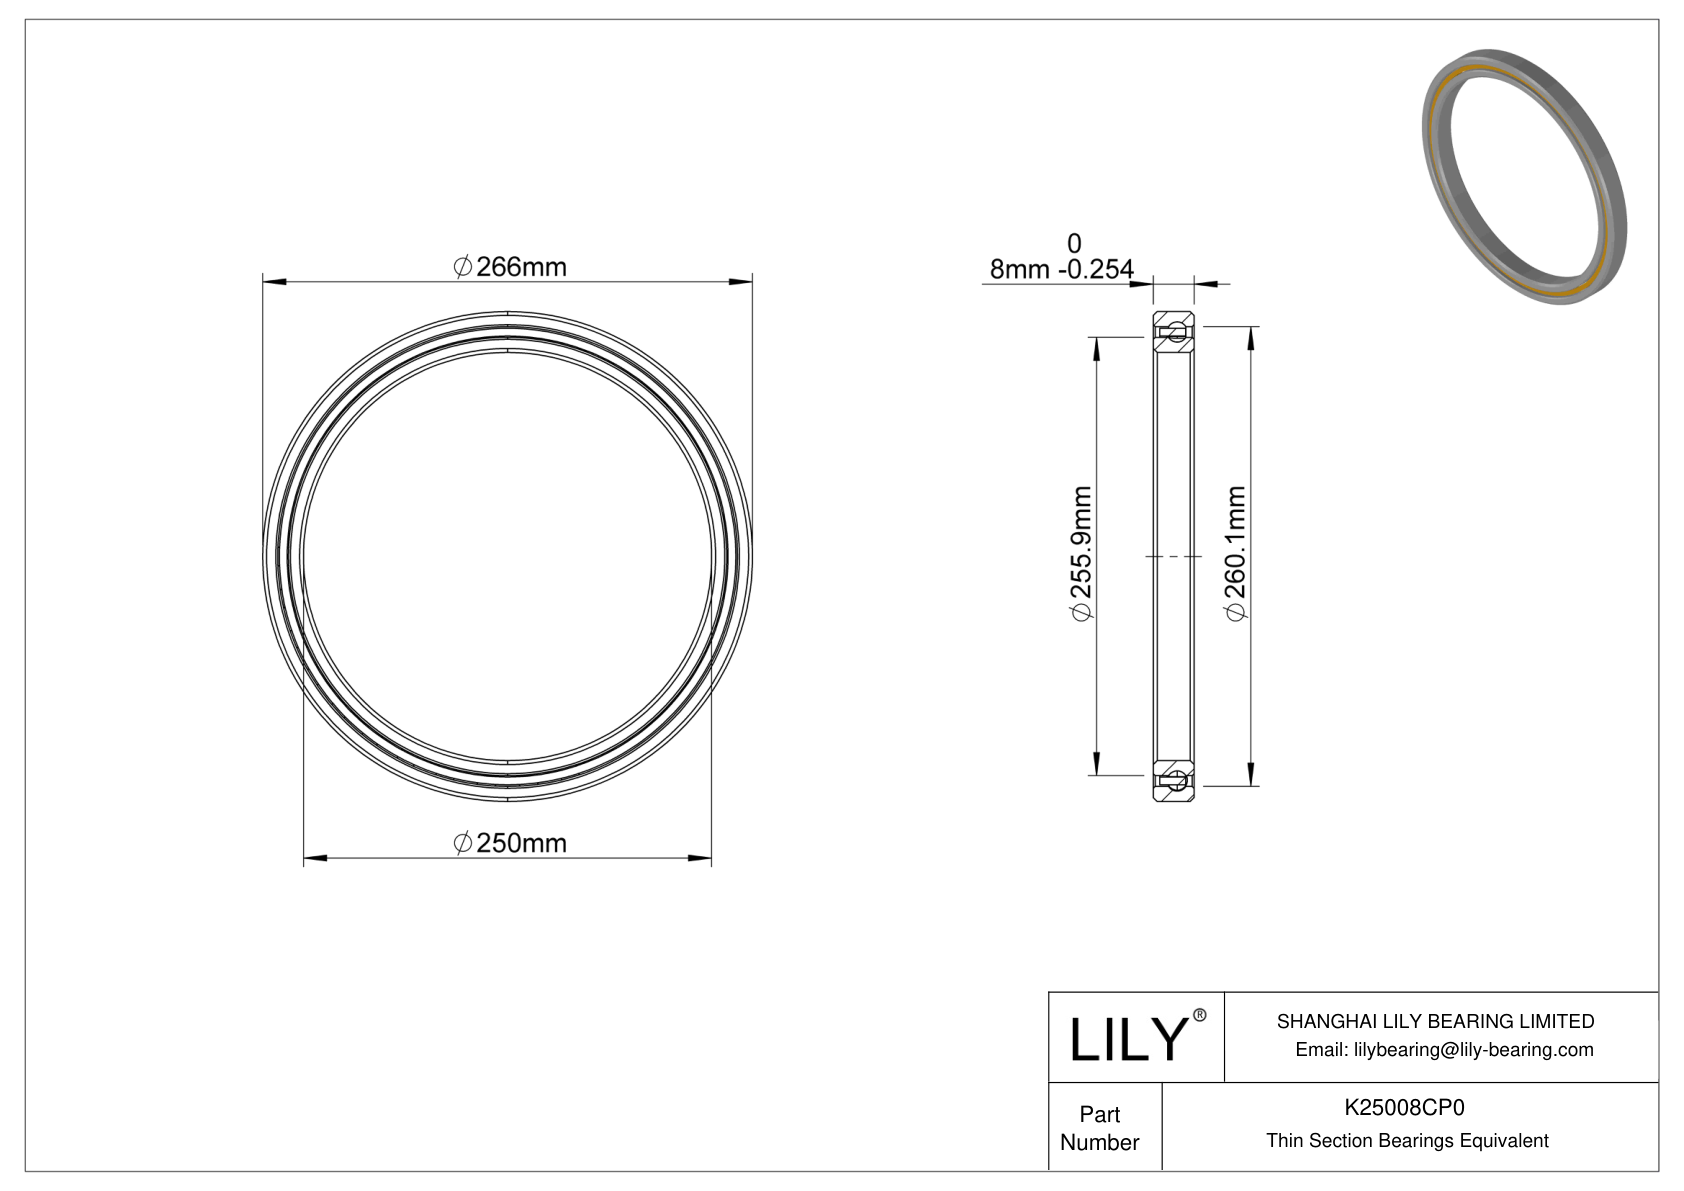 K25008CP0 Constant Section (CS) Bearings cad drawing